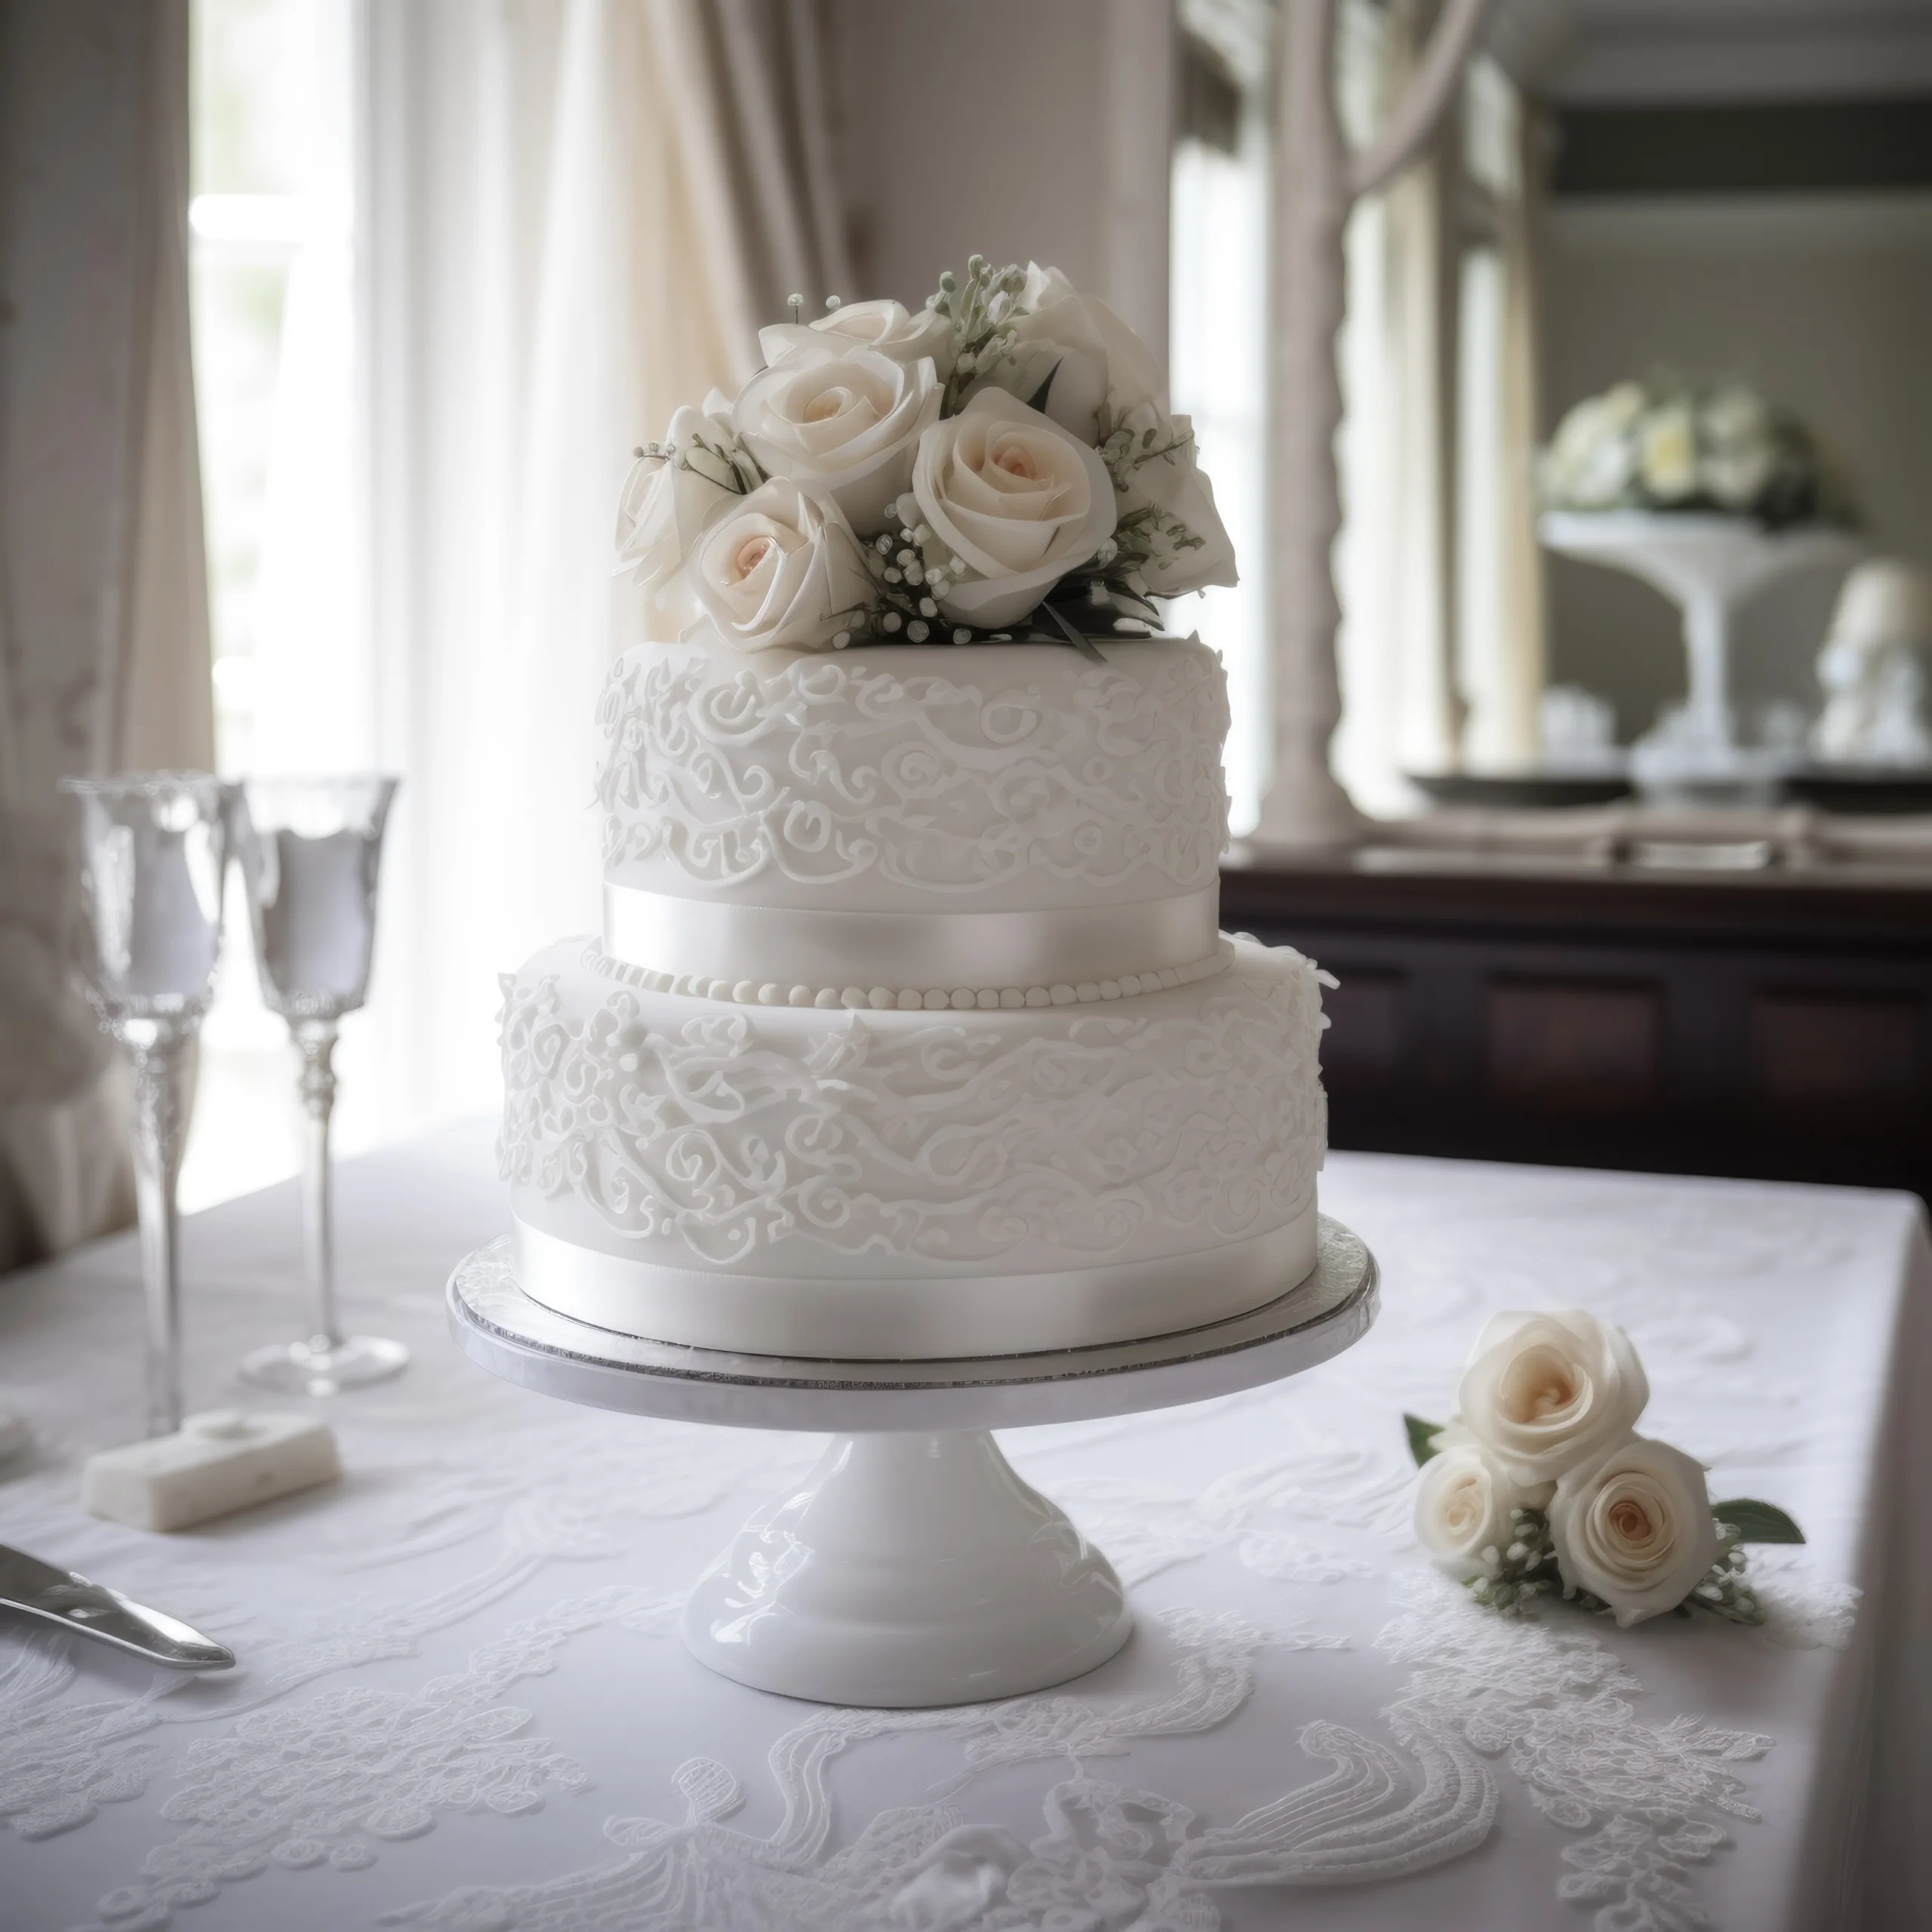 Hestercombe Gardens: a white wedding cake sitting on top of a table.